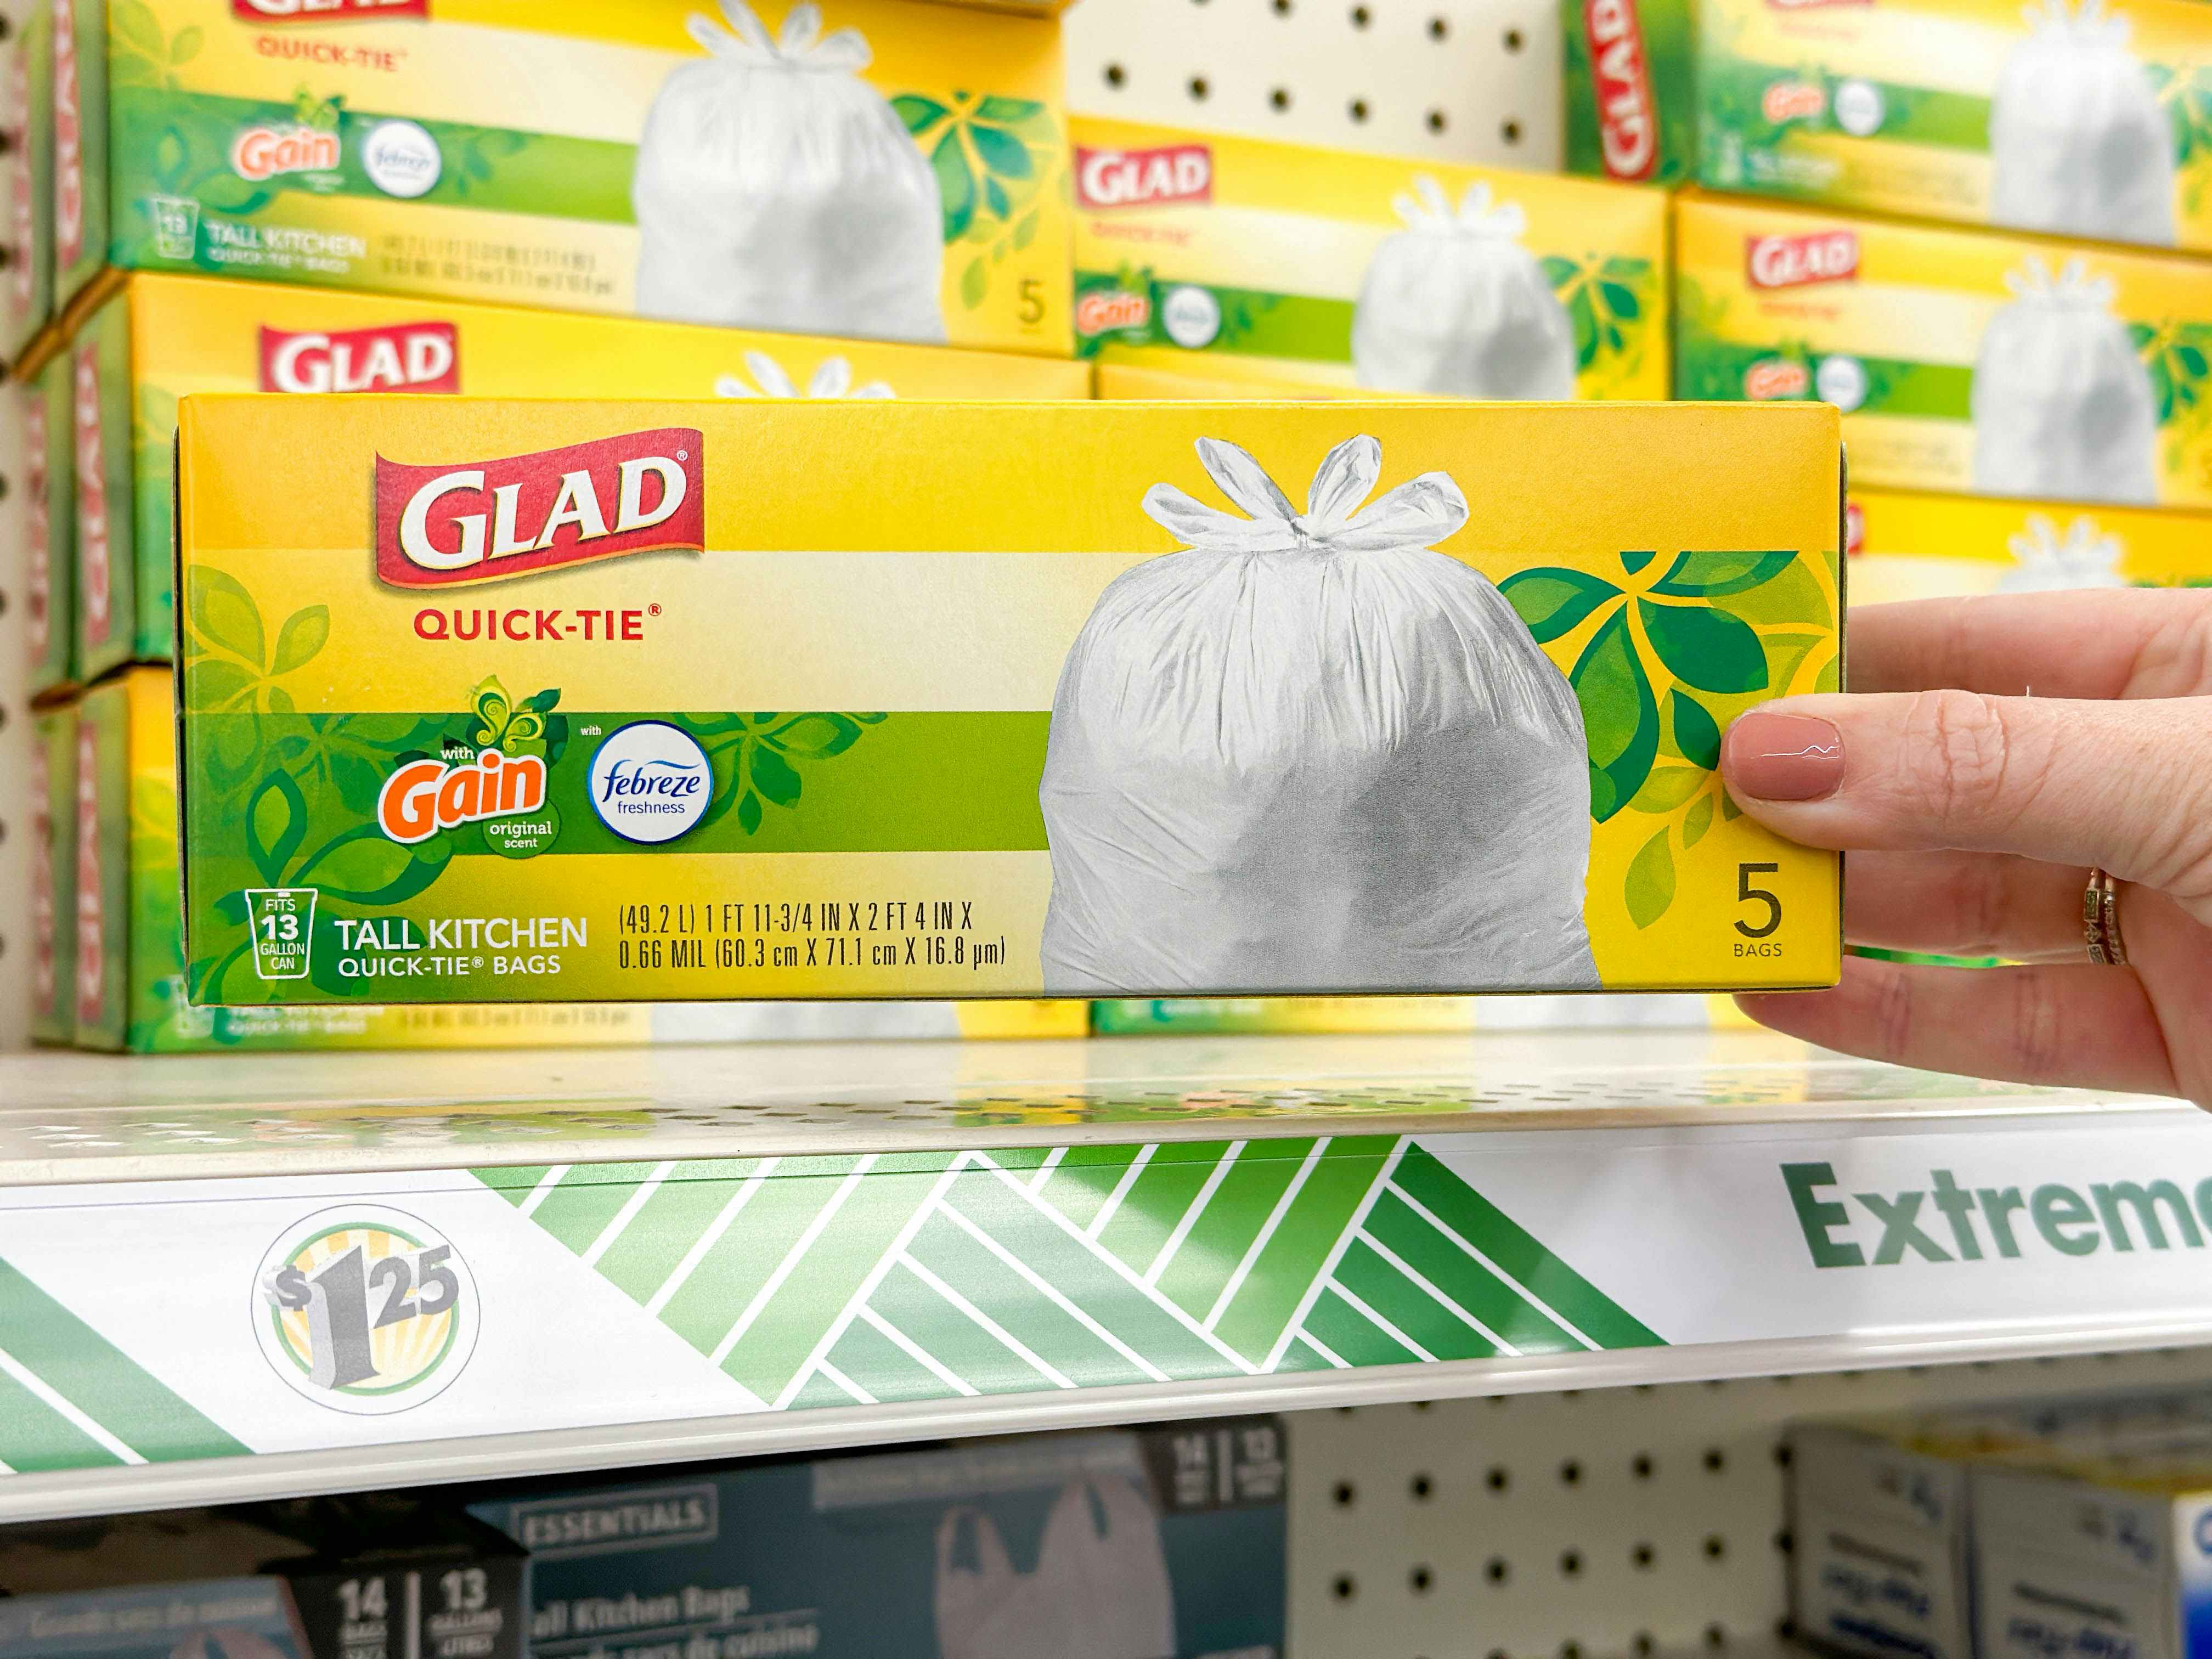 FREE Glad Storage Bags at Dollar Tree - MyLitter - One Deal At A Time